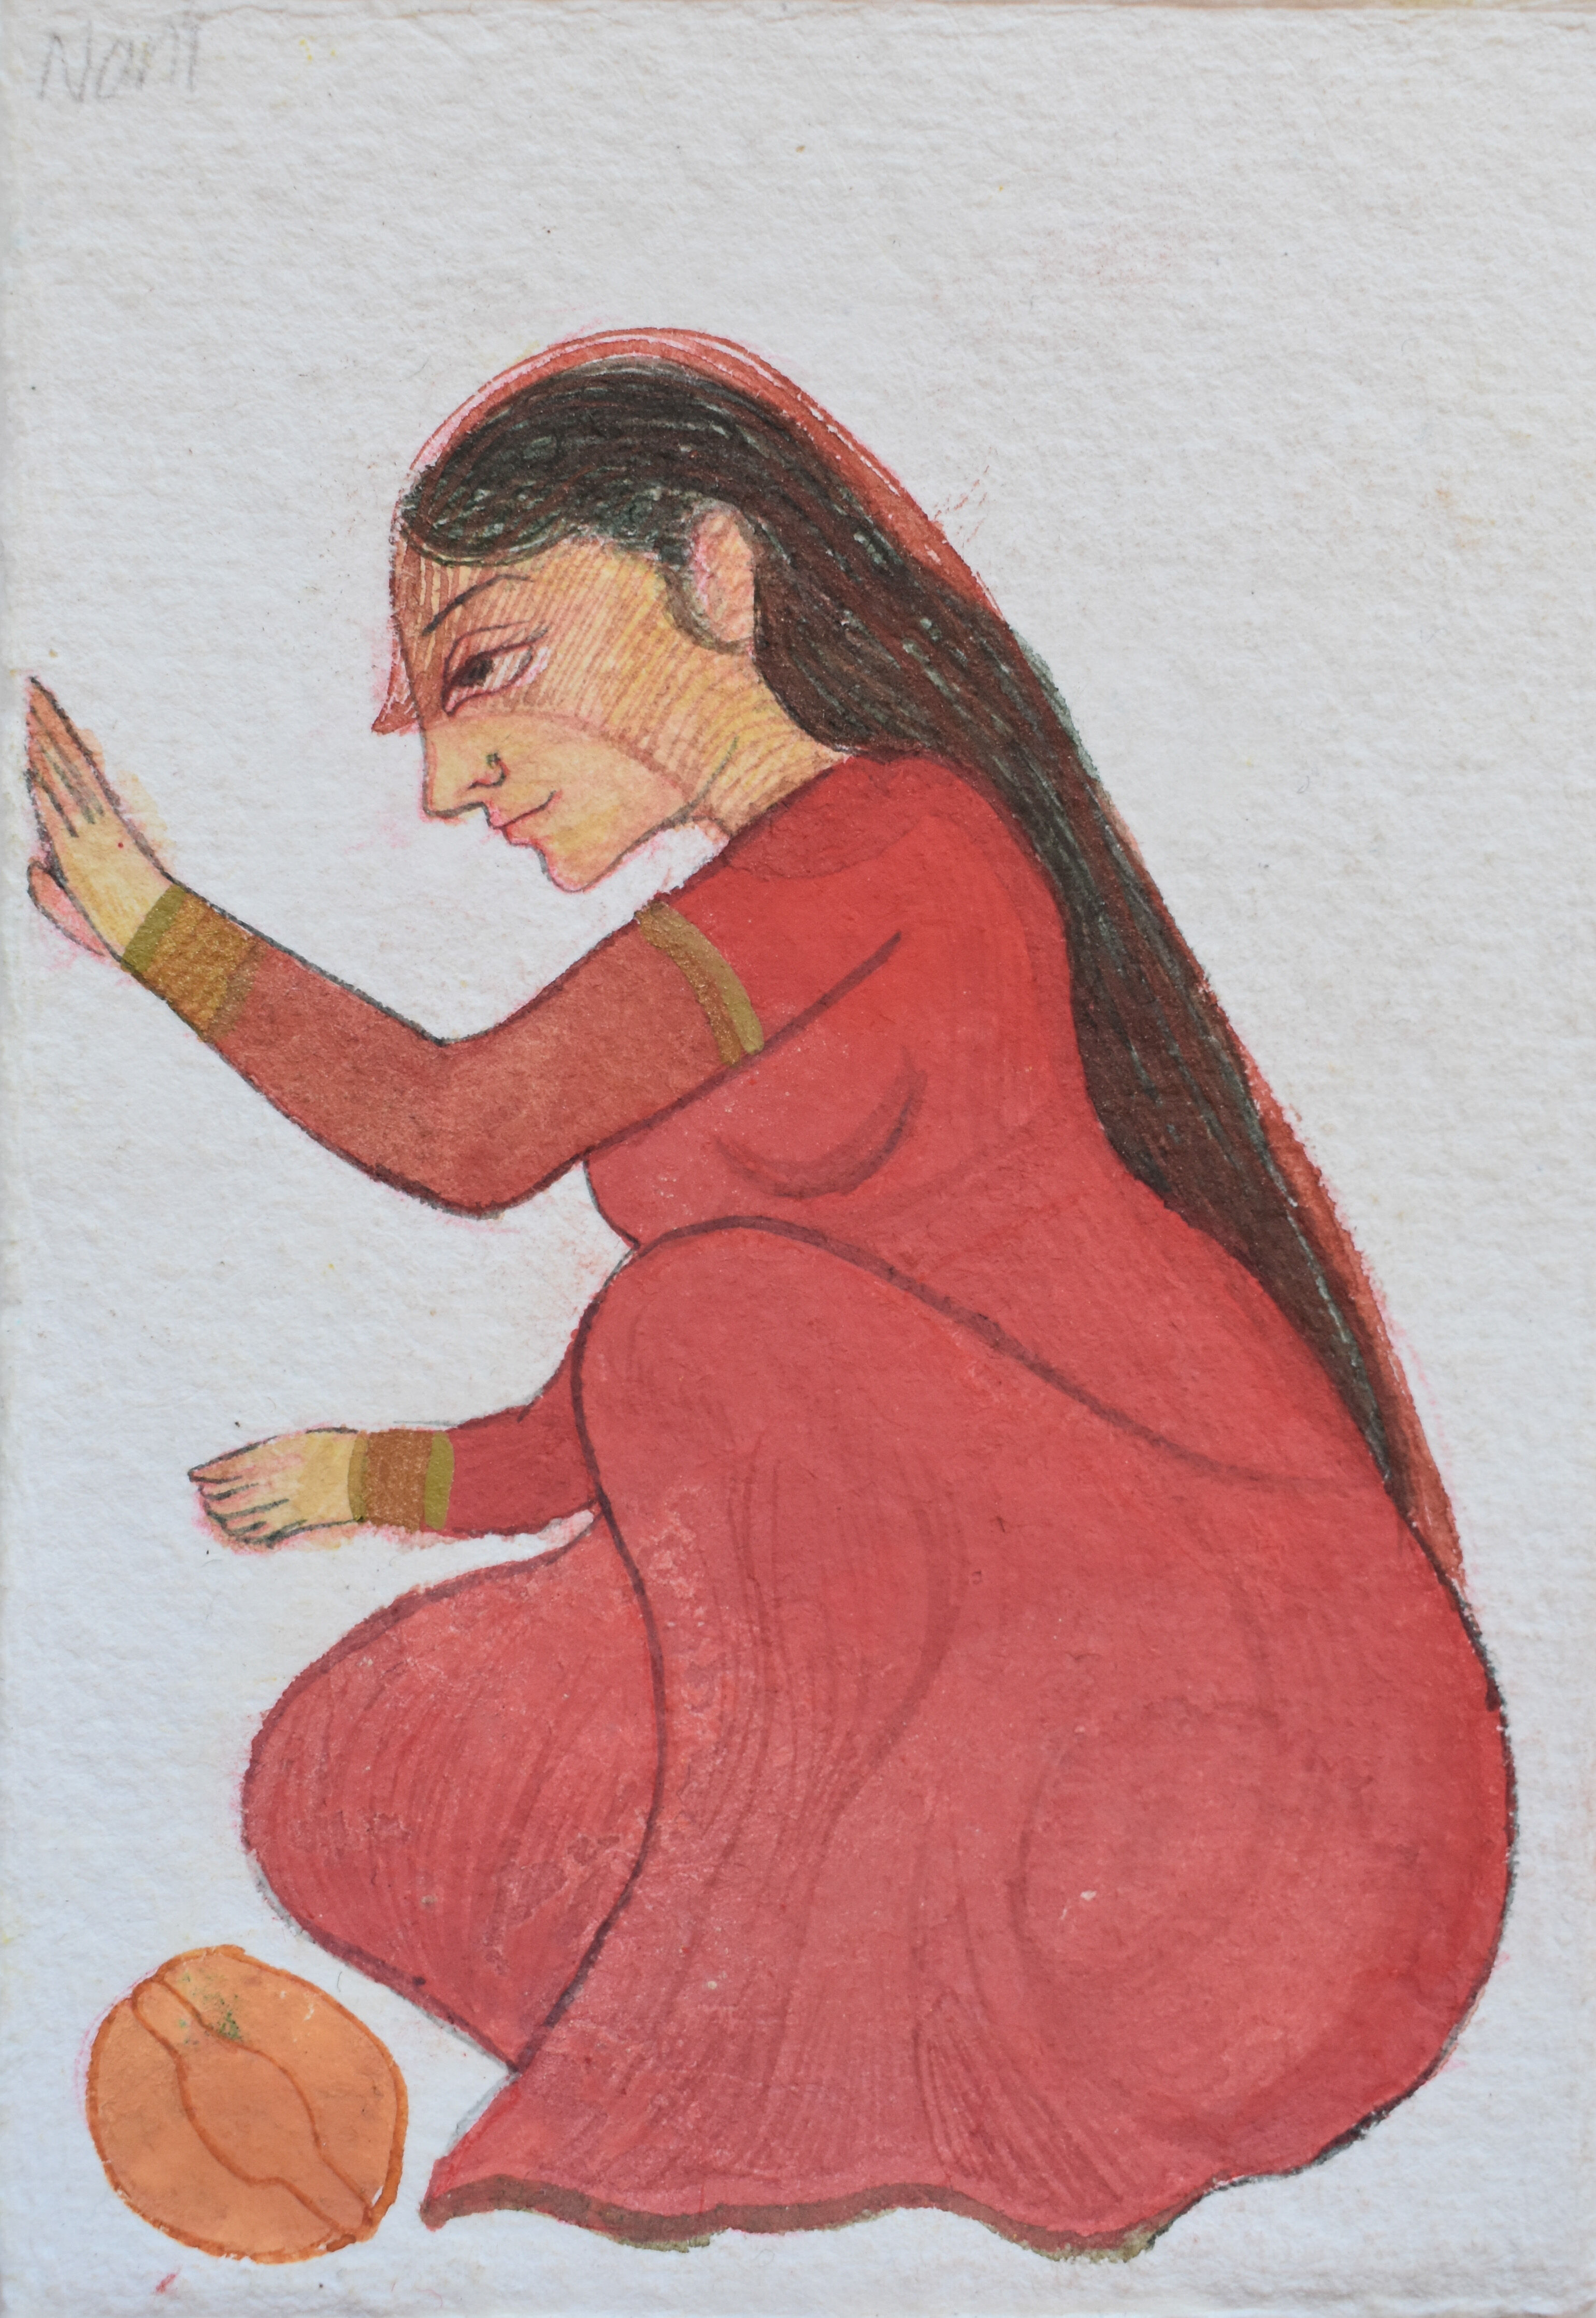 A stylized painting of a woman in a red outfit seated and reaching out towards a small, orange object on textured paper.